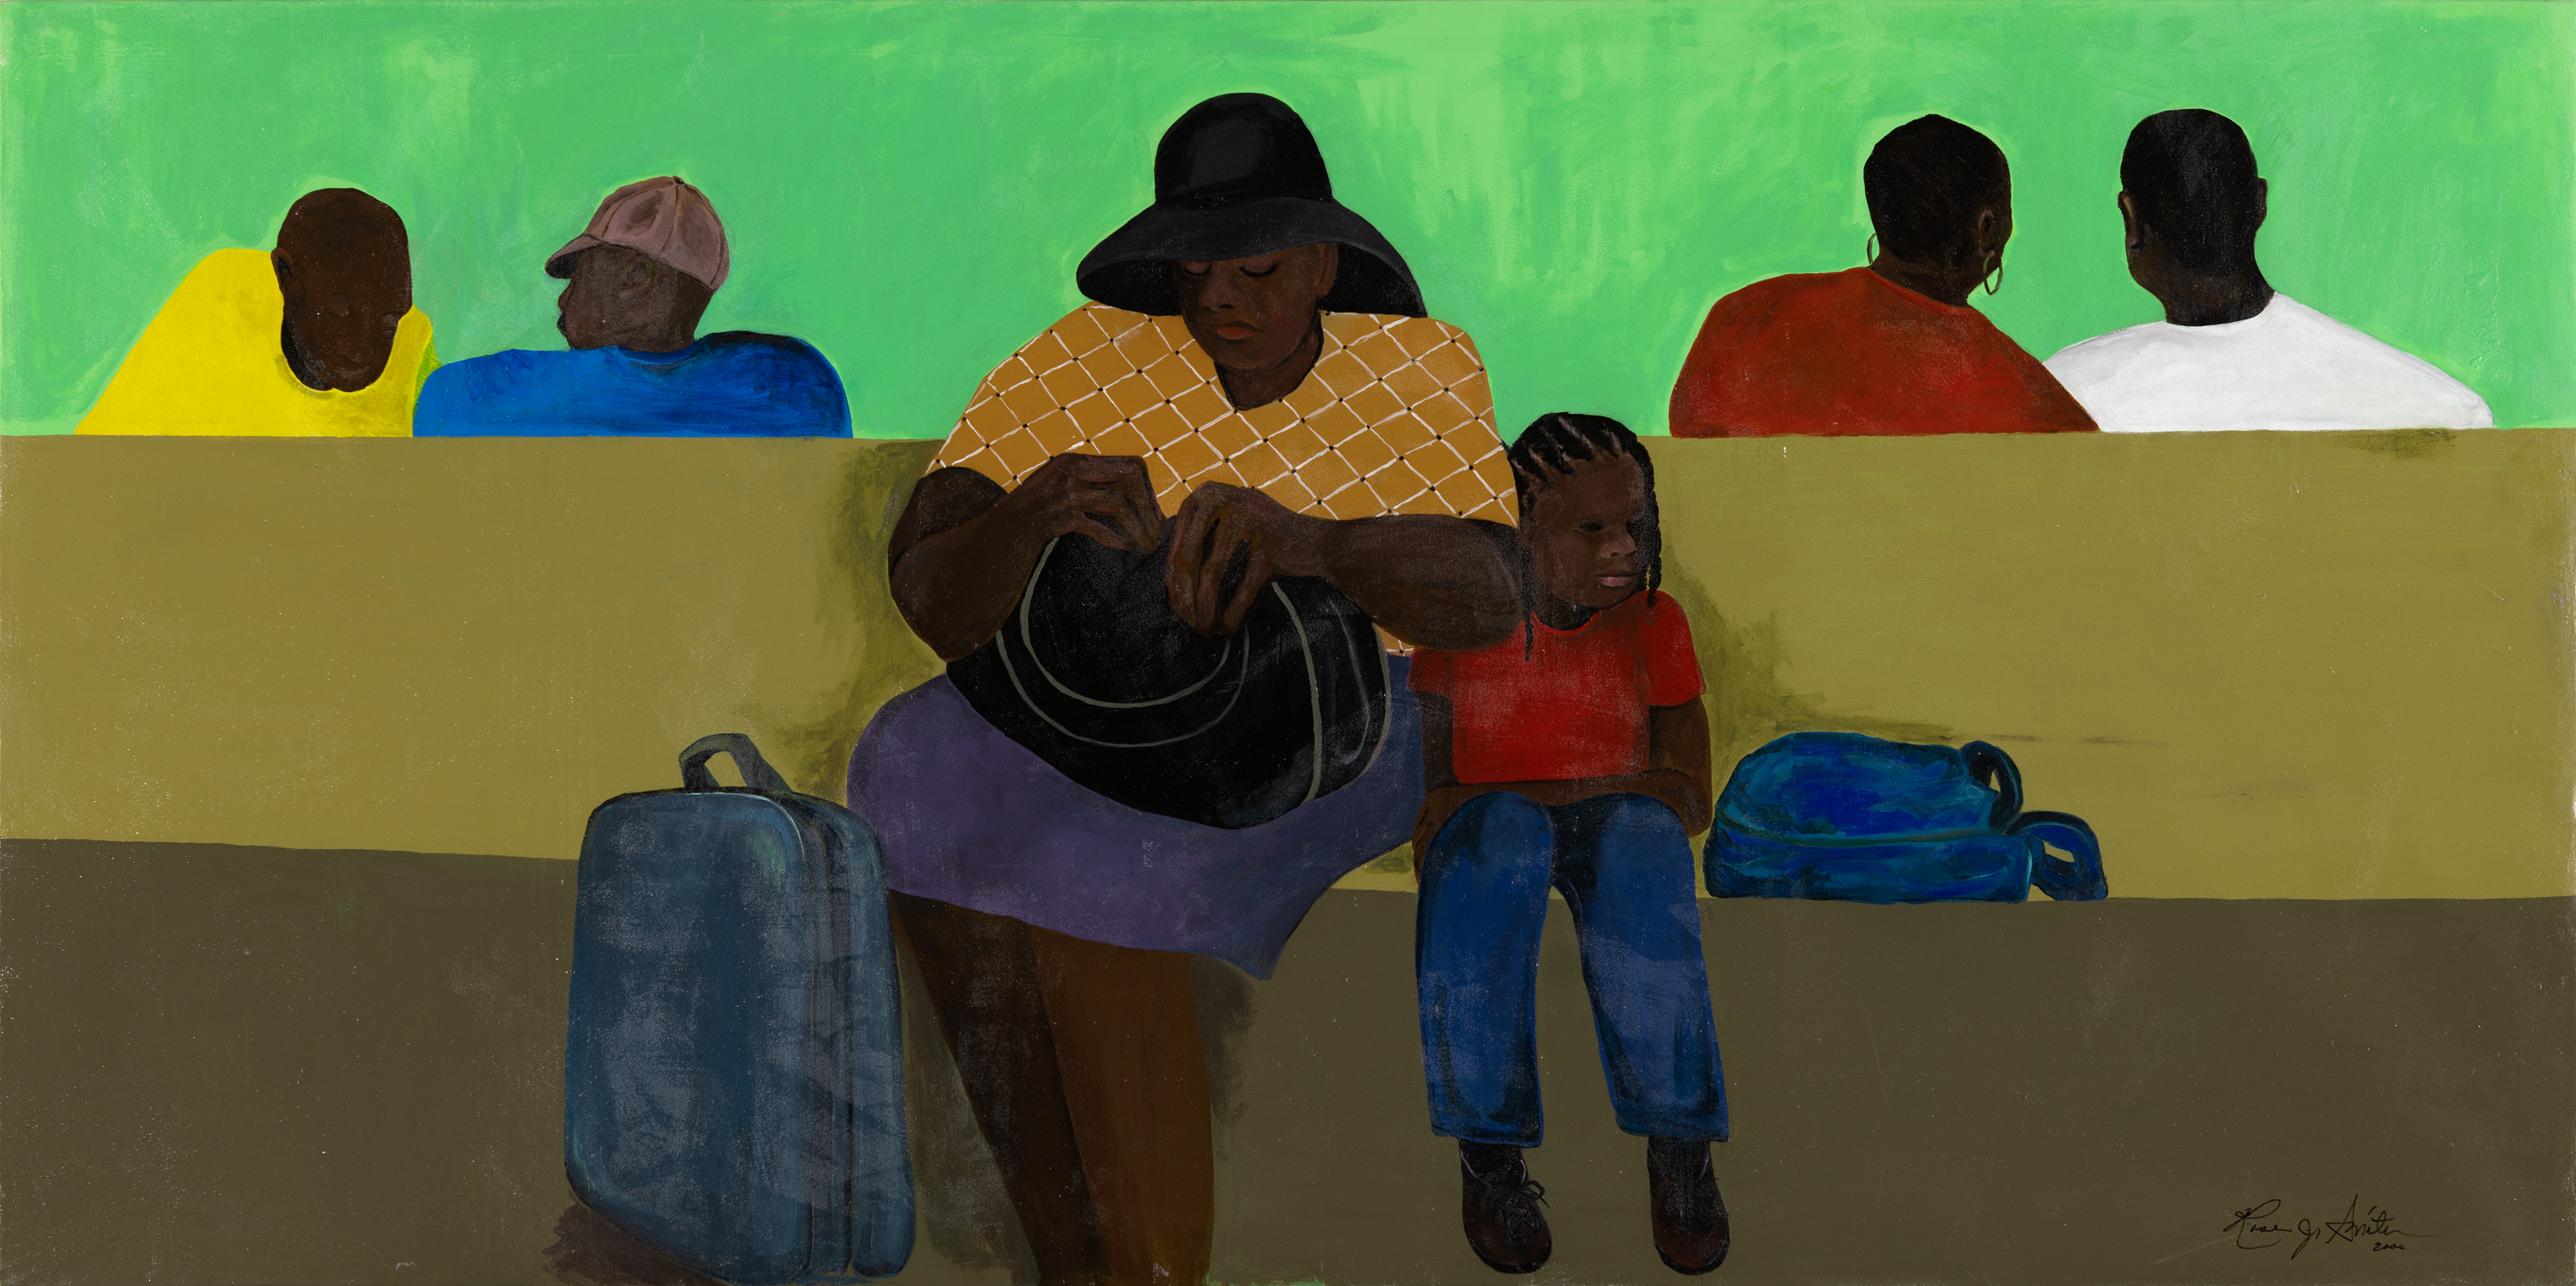 person sitting with child and bags, surrounded by other people sitting